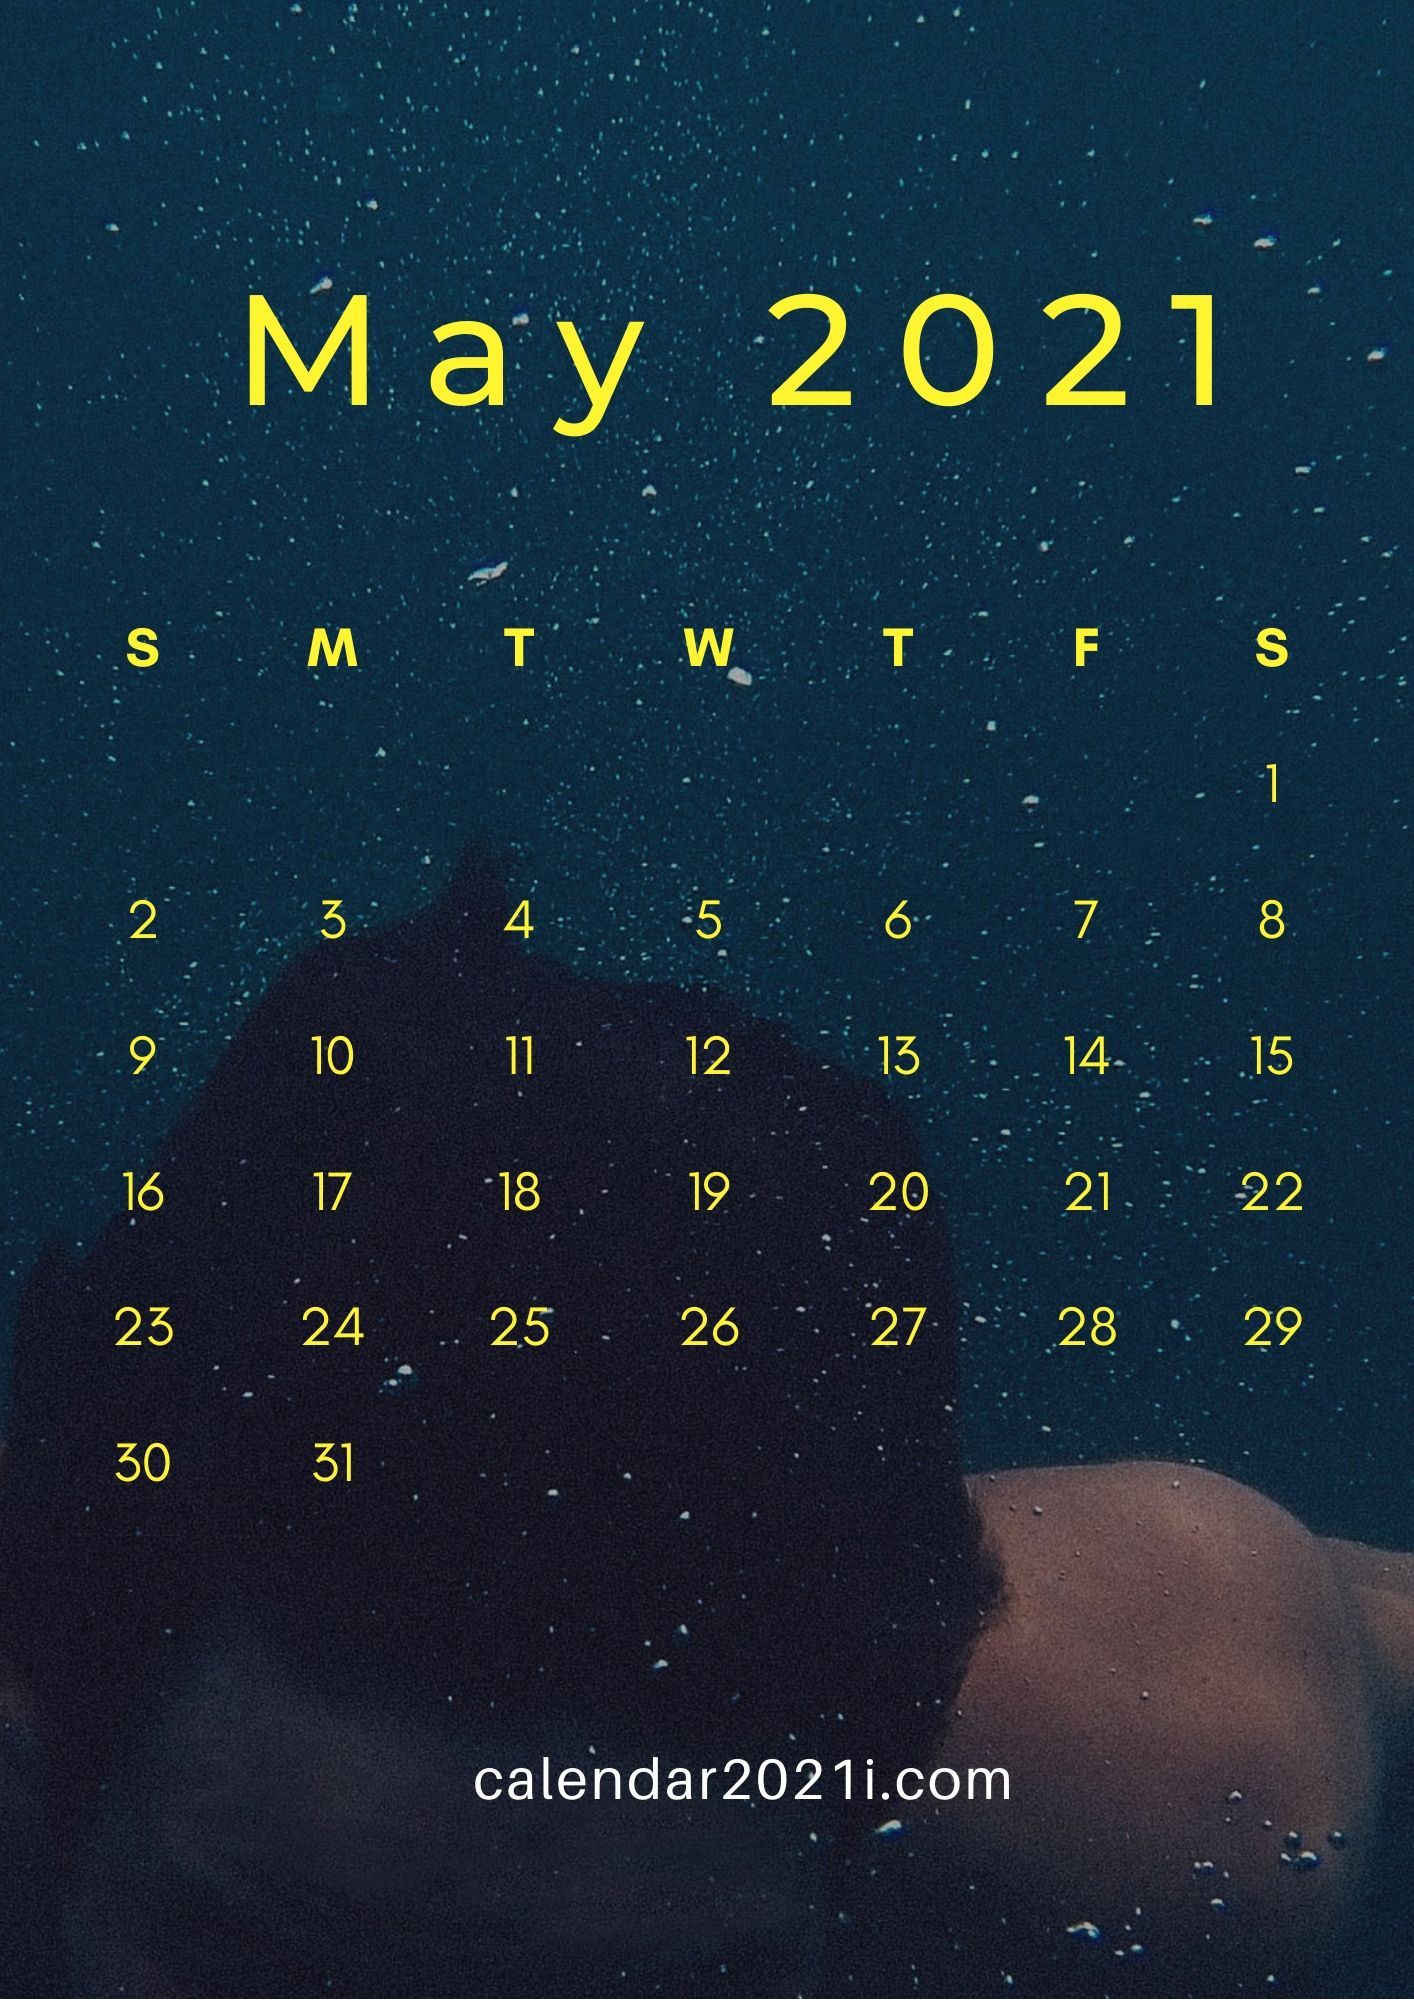 Free Download May 2021 Calendar Hd Iphone Wallpaper To Use As Phone